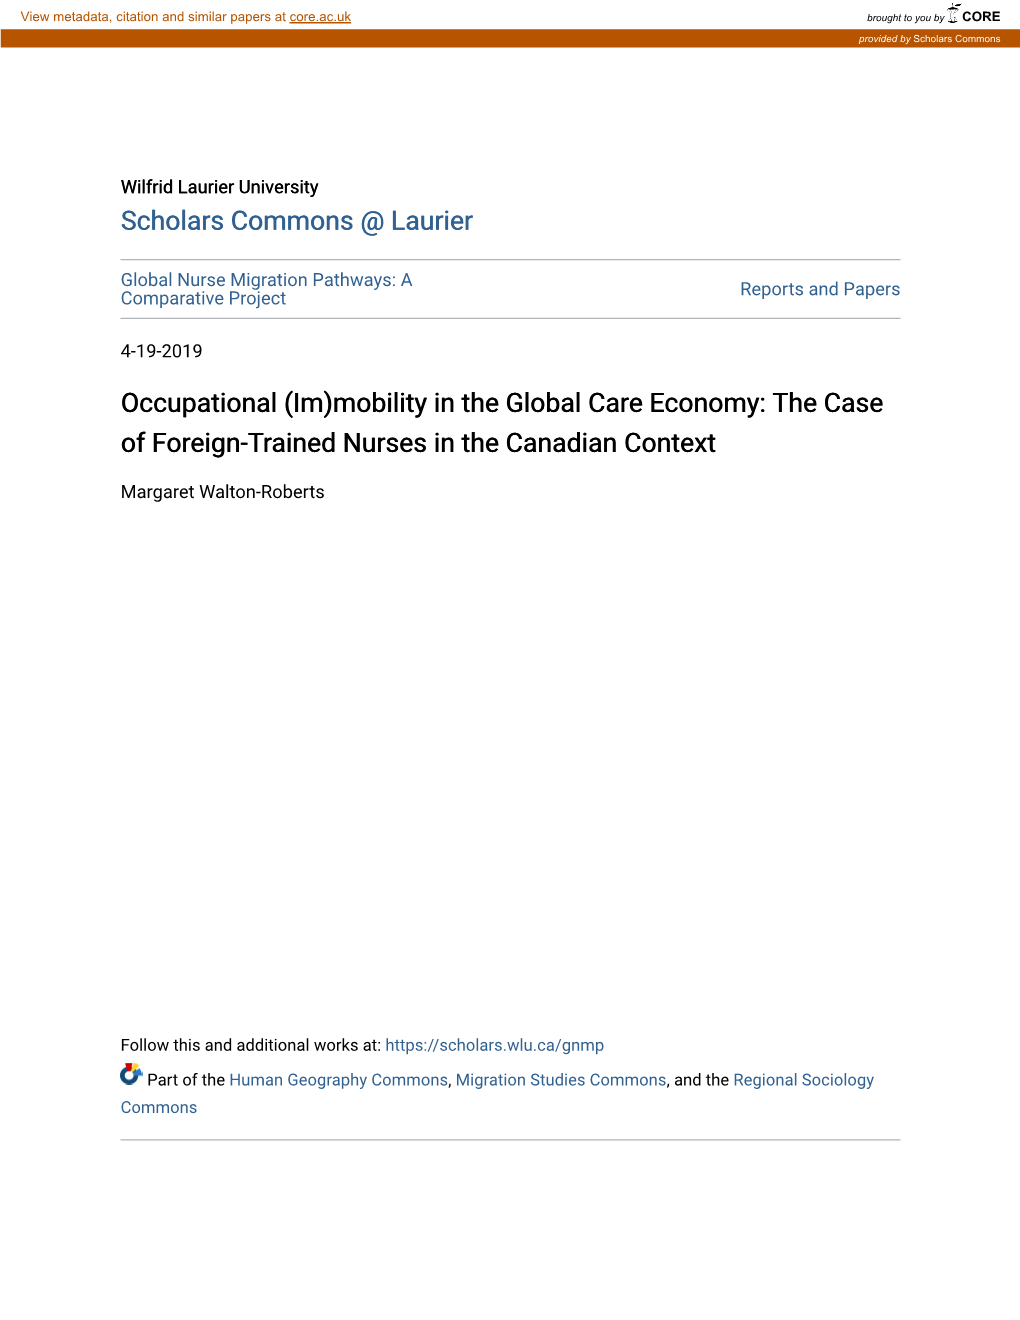 Occupational (Im)Mobility in the Global Care Economy: the Case of Foreign-Trained Nurses in the Canadian Context